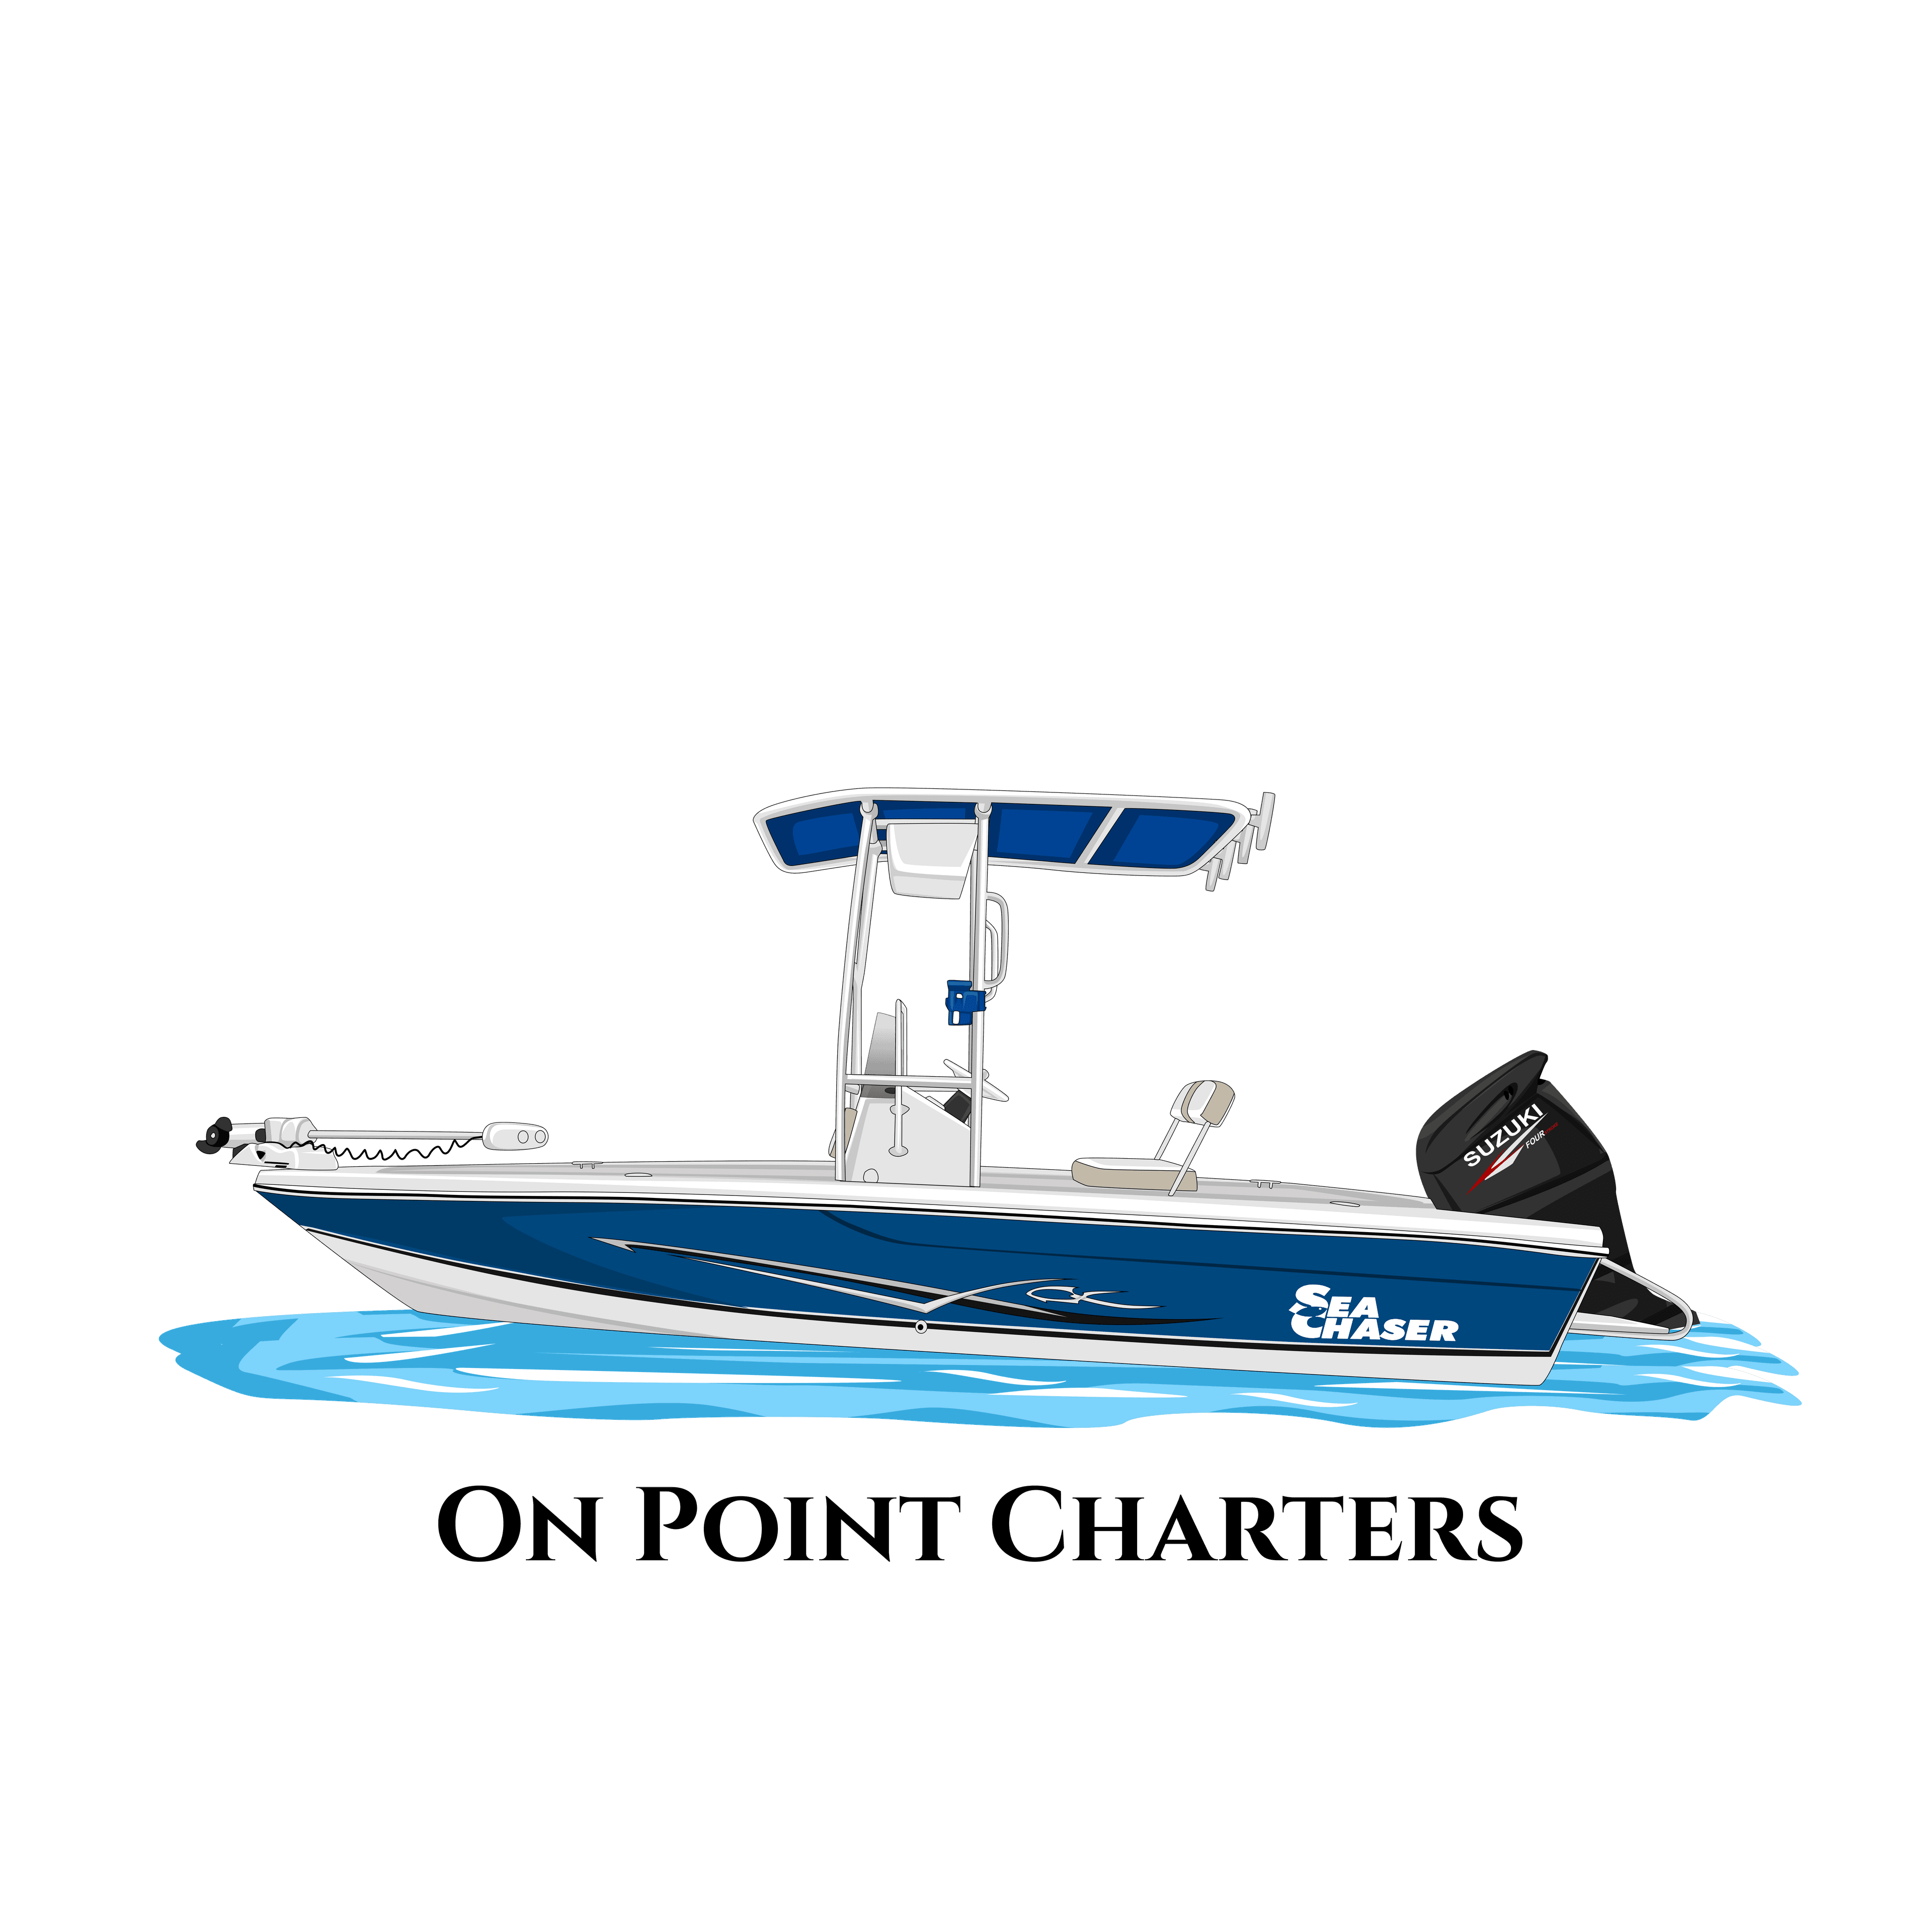 On Point Charters Logo